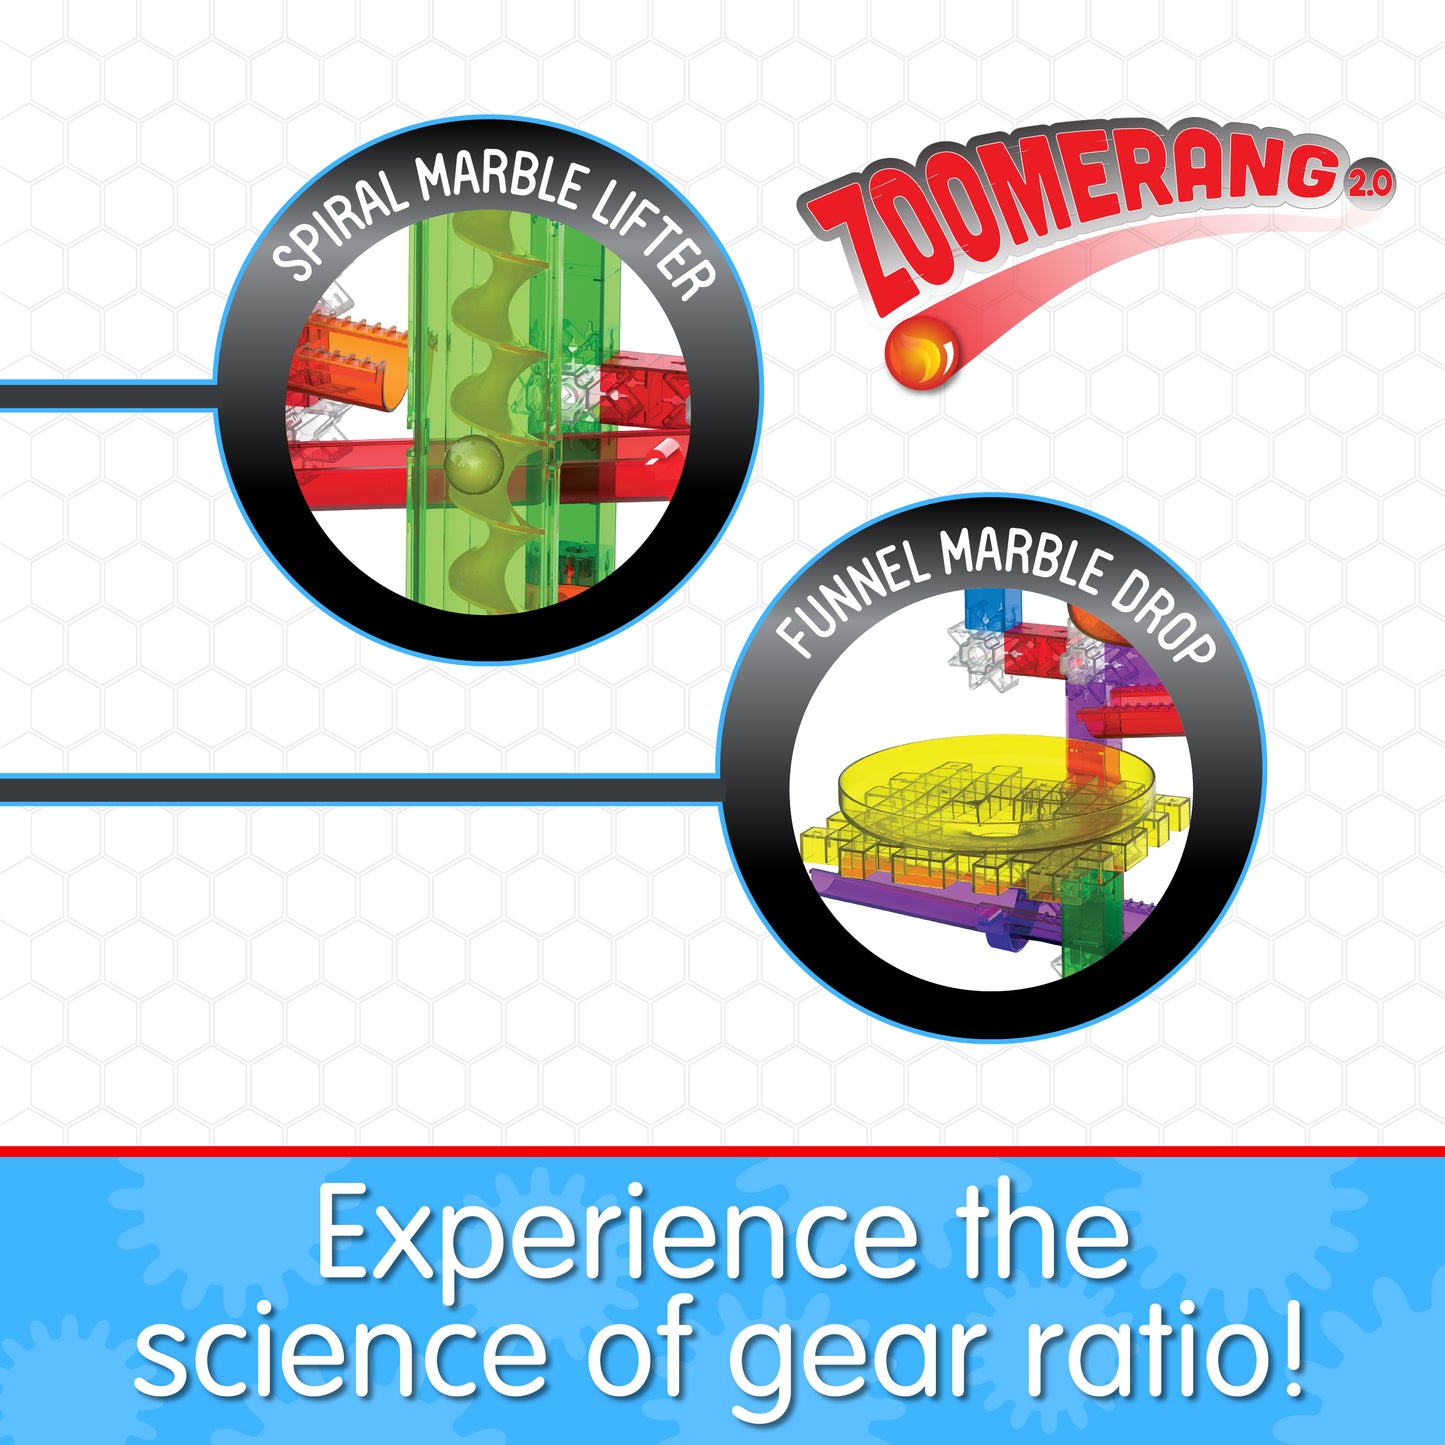 Infographic about Zoomerang 2.0's features that says, "Experience the science of gear ratio!"